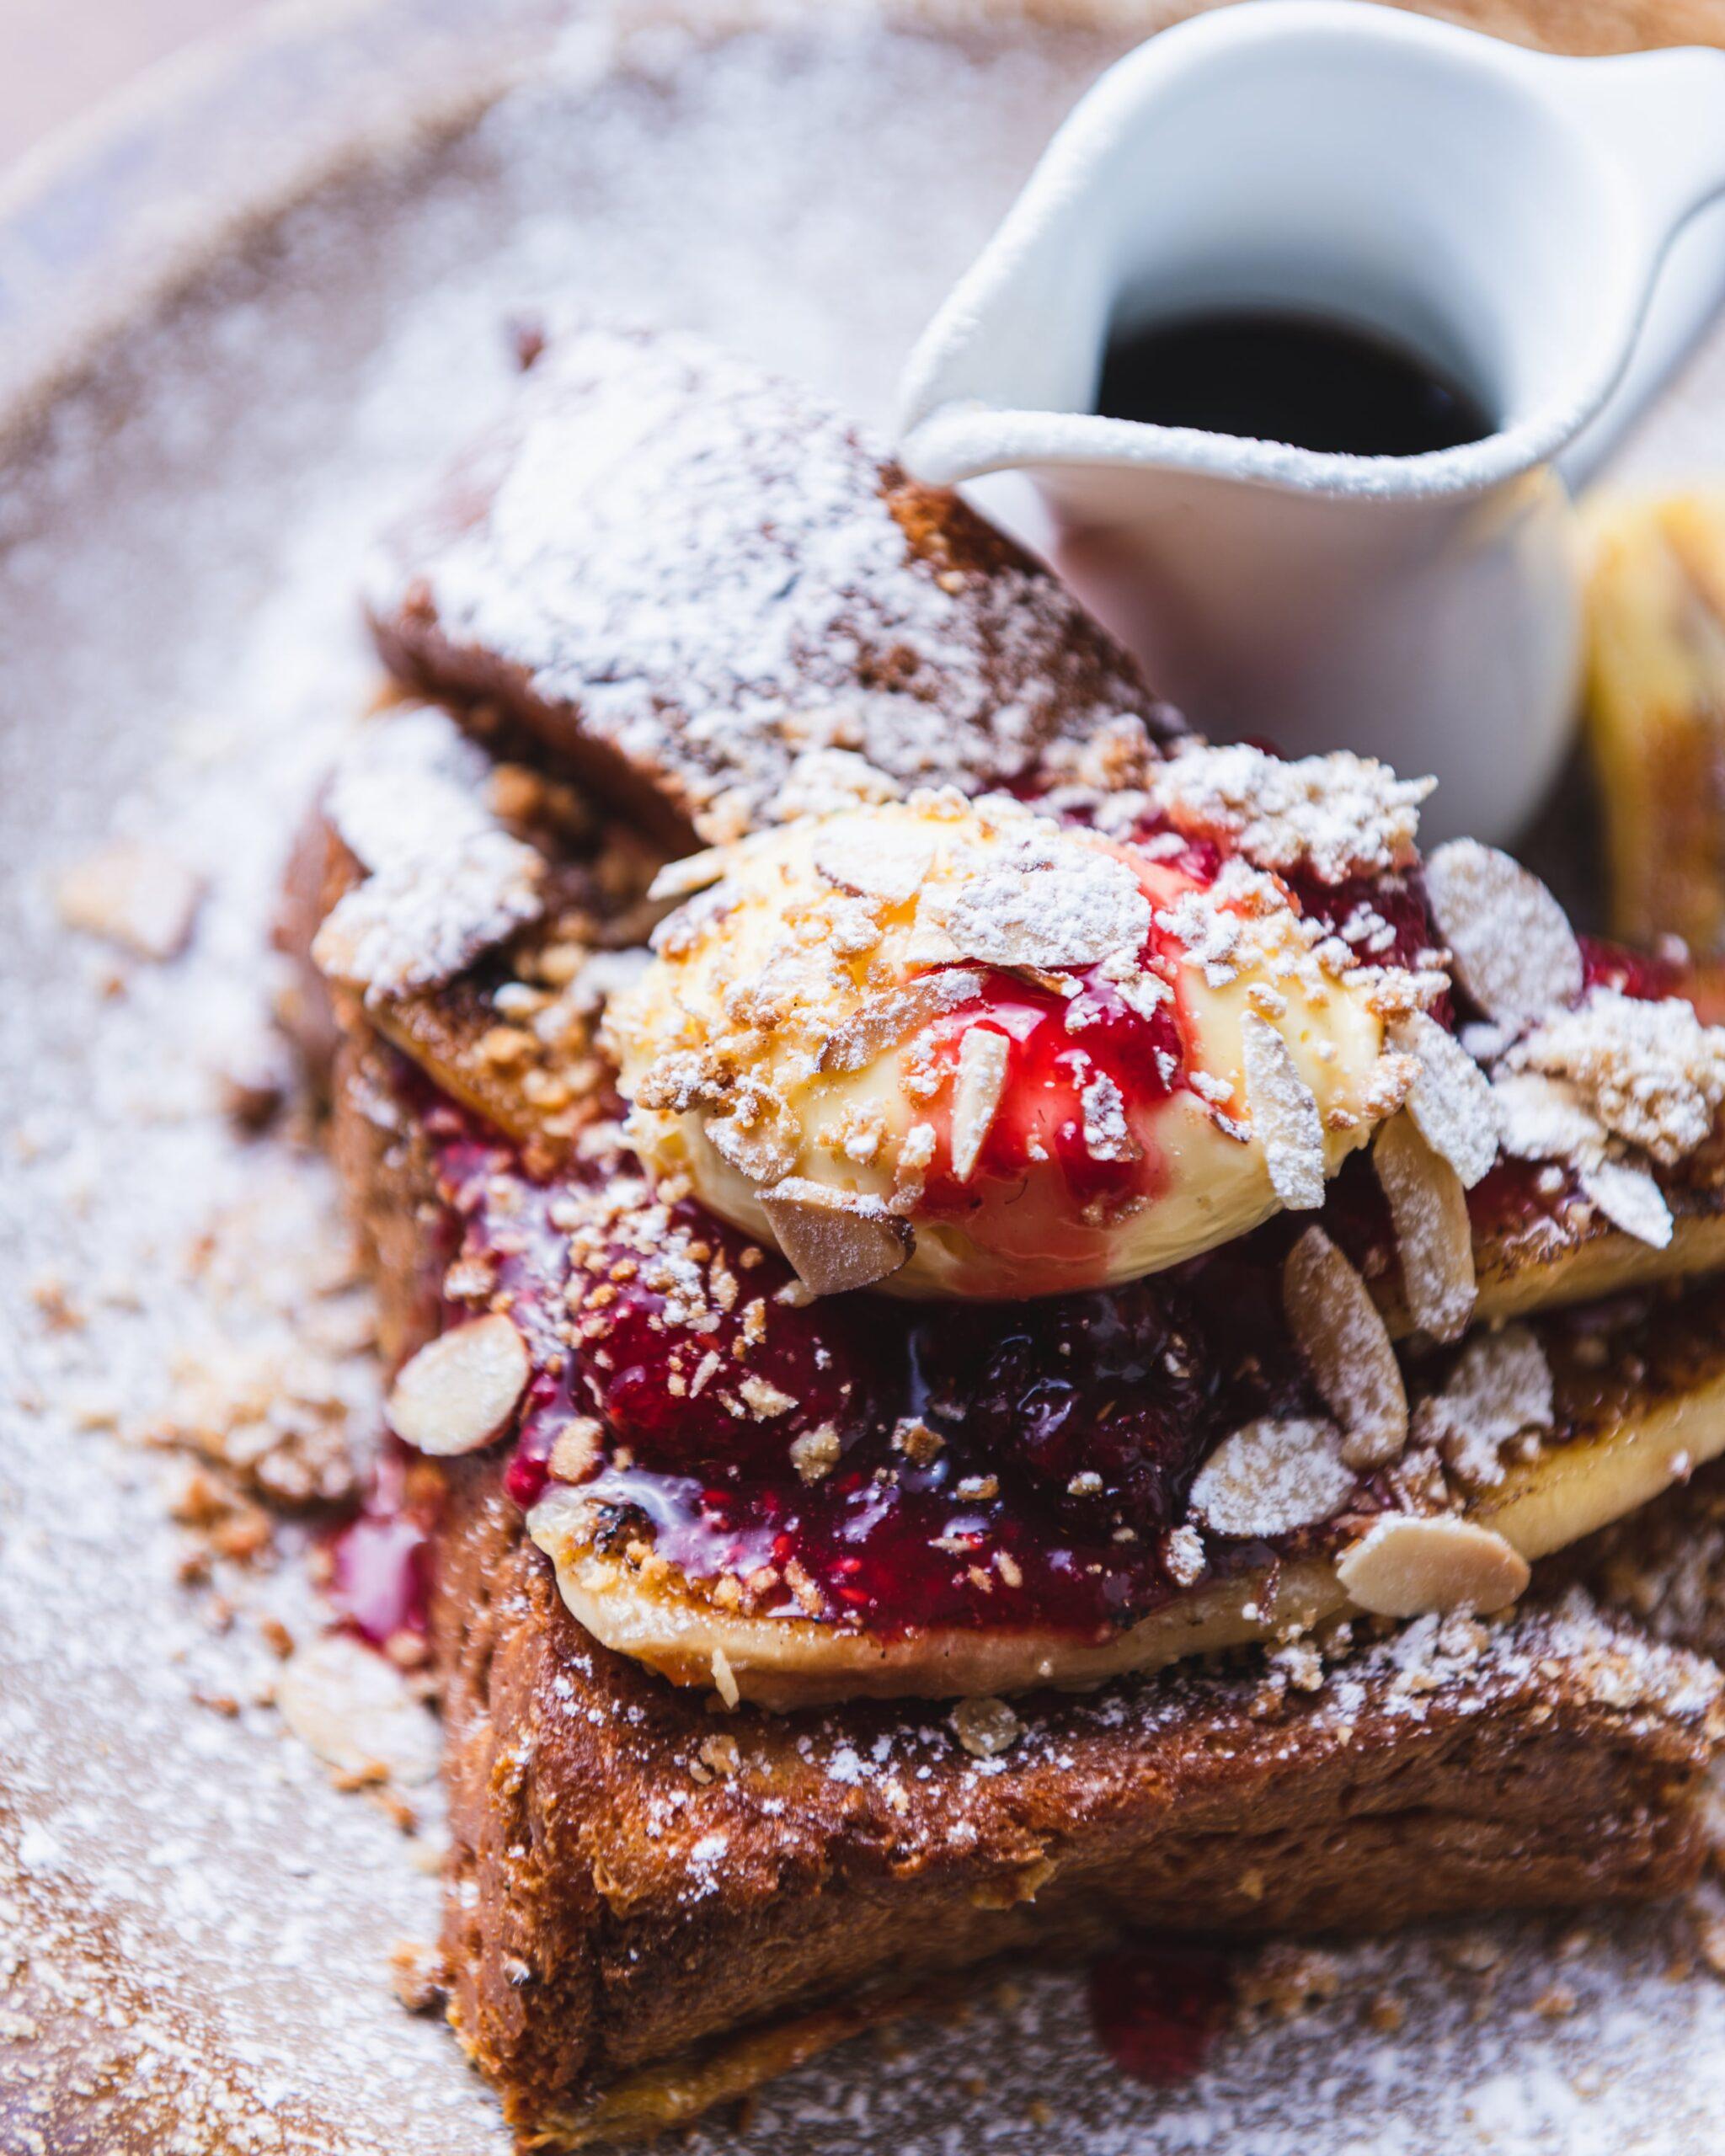 Wetlands Eatery - French Toast with Banana